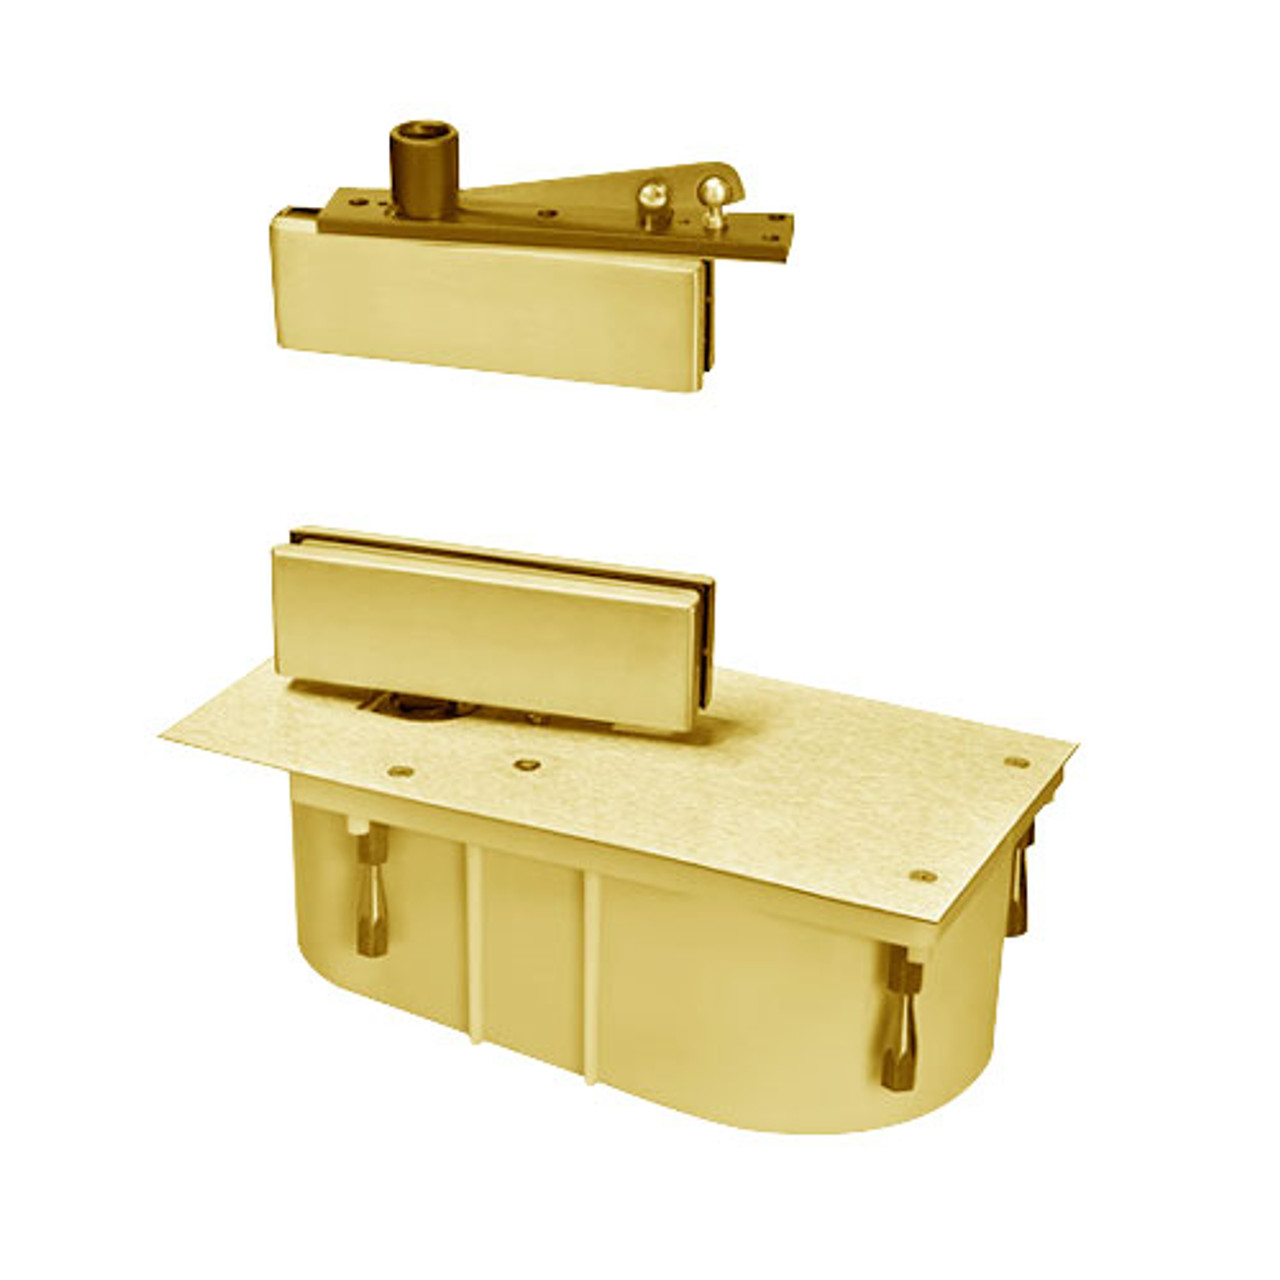 428-105N-LTP-RH-605 Rixson 428 Series Heavy Duty Single Acting Center Hung Floor Closer with Patch Fittings in Bright Brass Finish